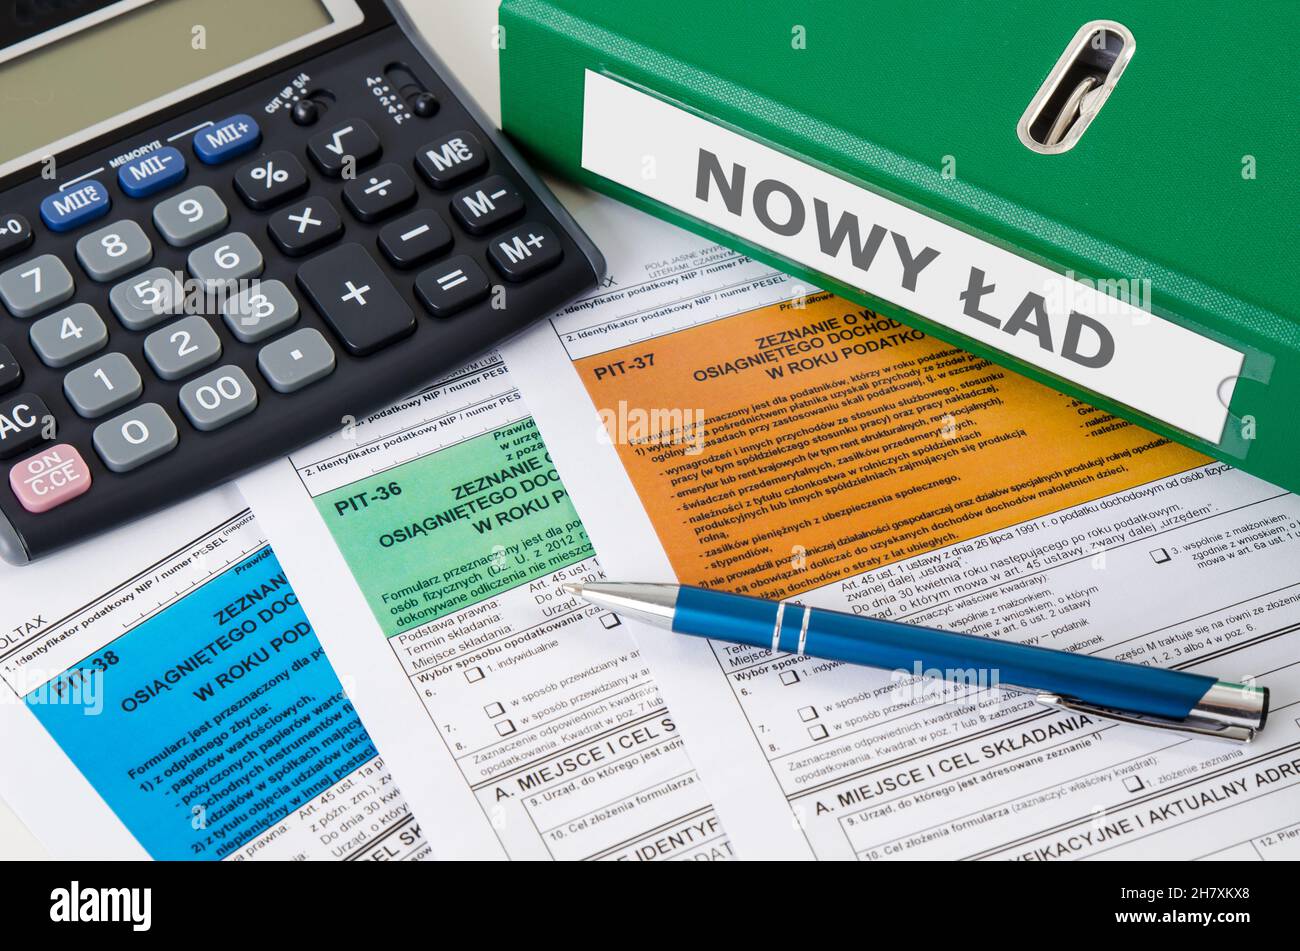 New polish tax regulations. New 2022 order named 'Nowy Ład'. Polish tax forms on desk. Stock Photo